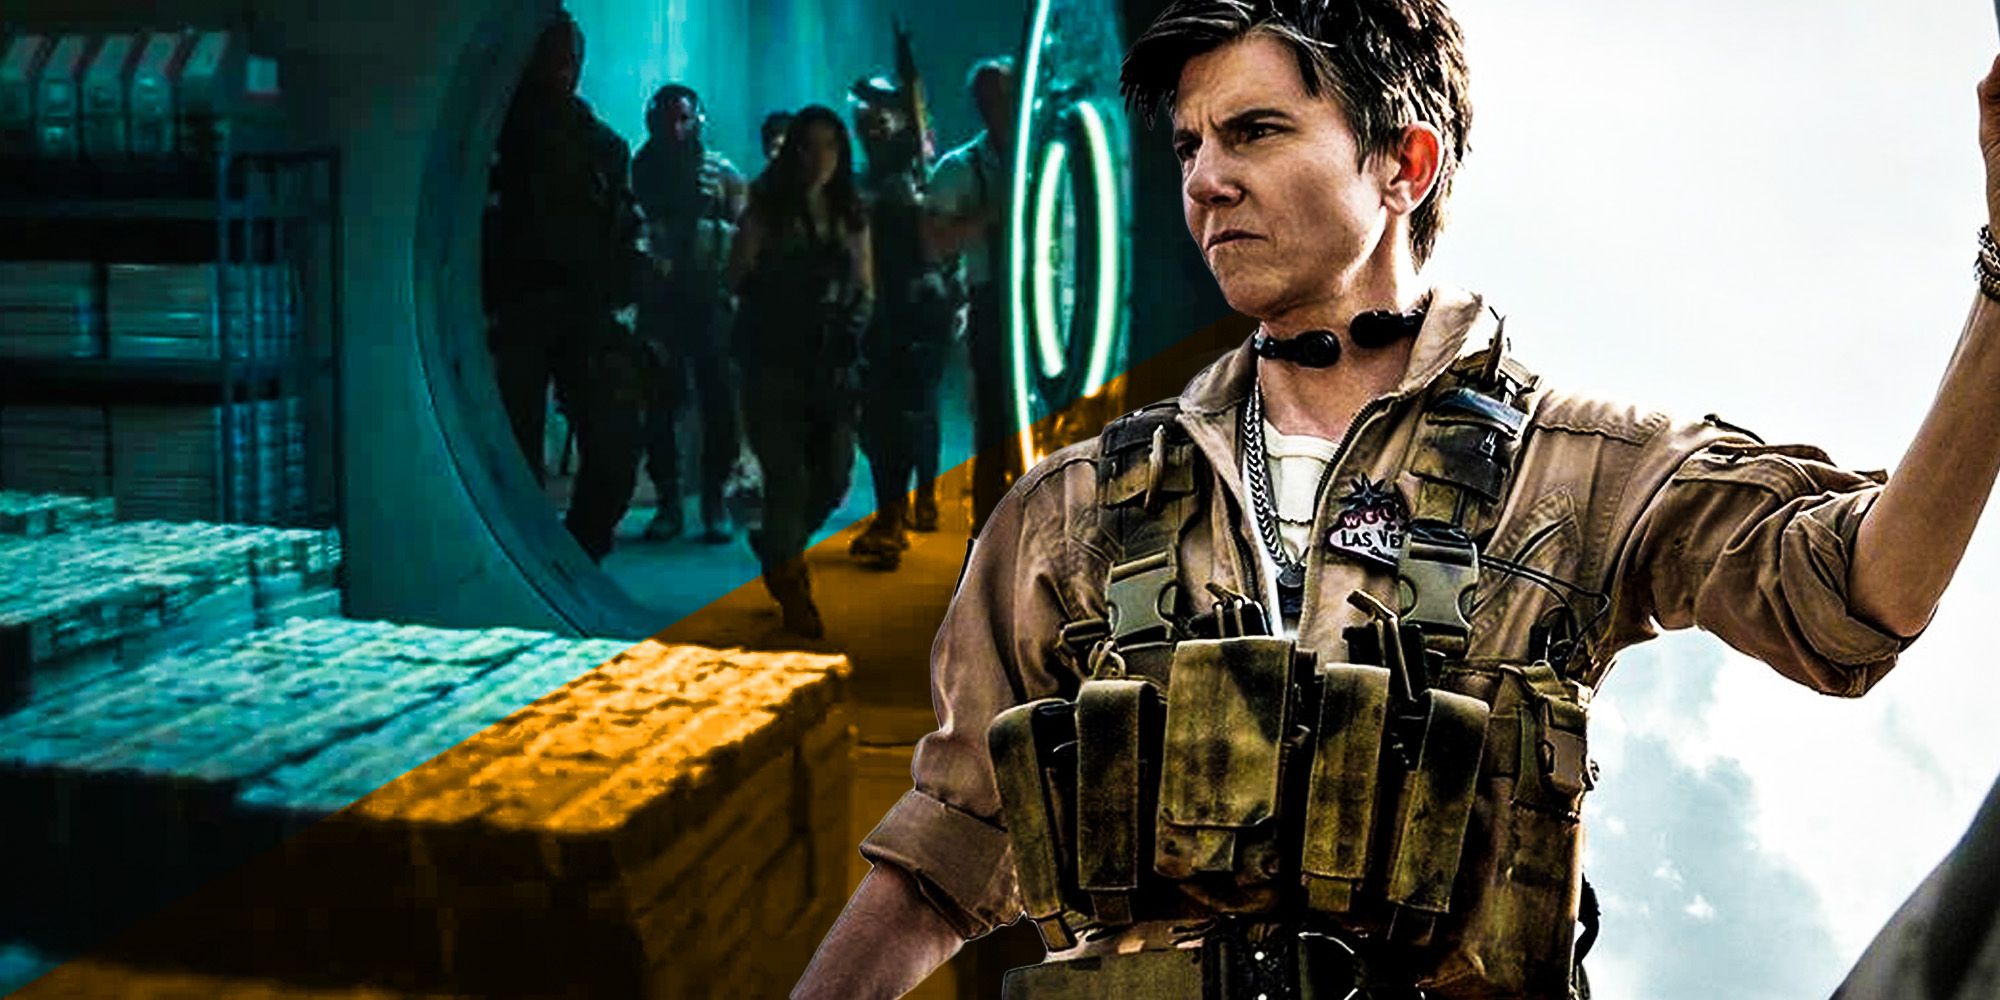 Why Army of the Deads Team Care About Money in Zombie Apocalypse